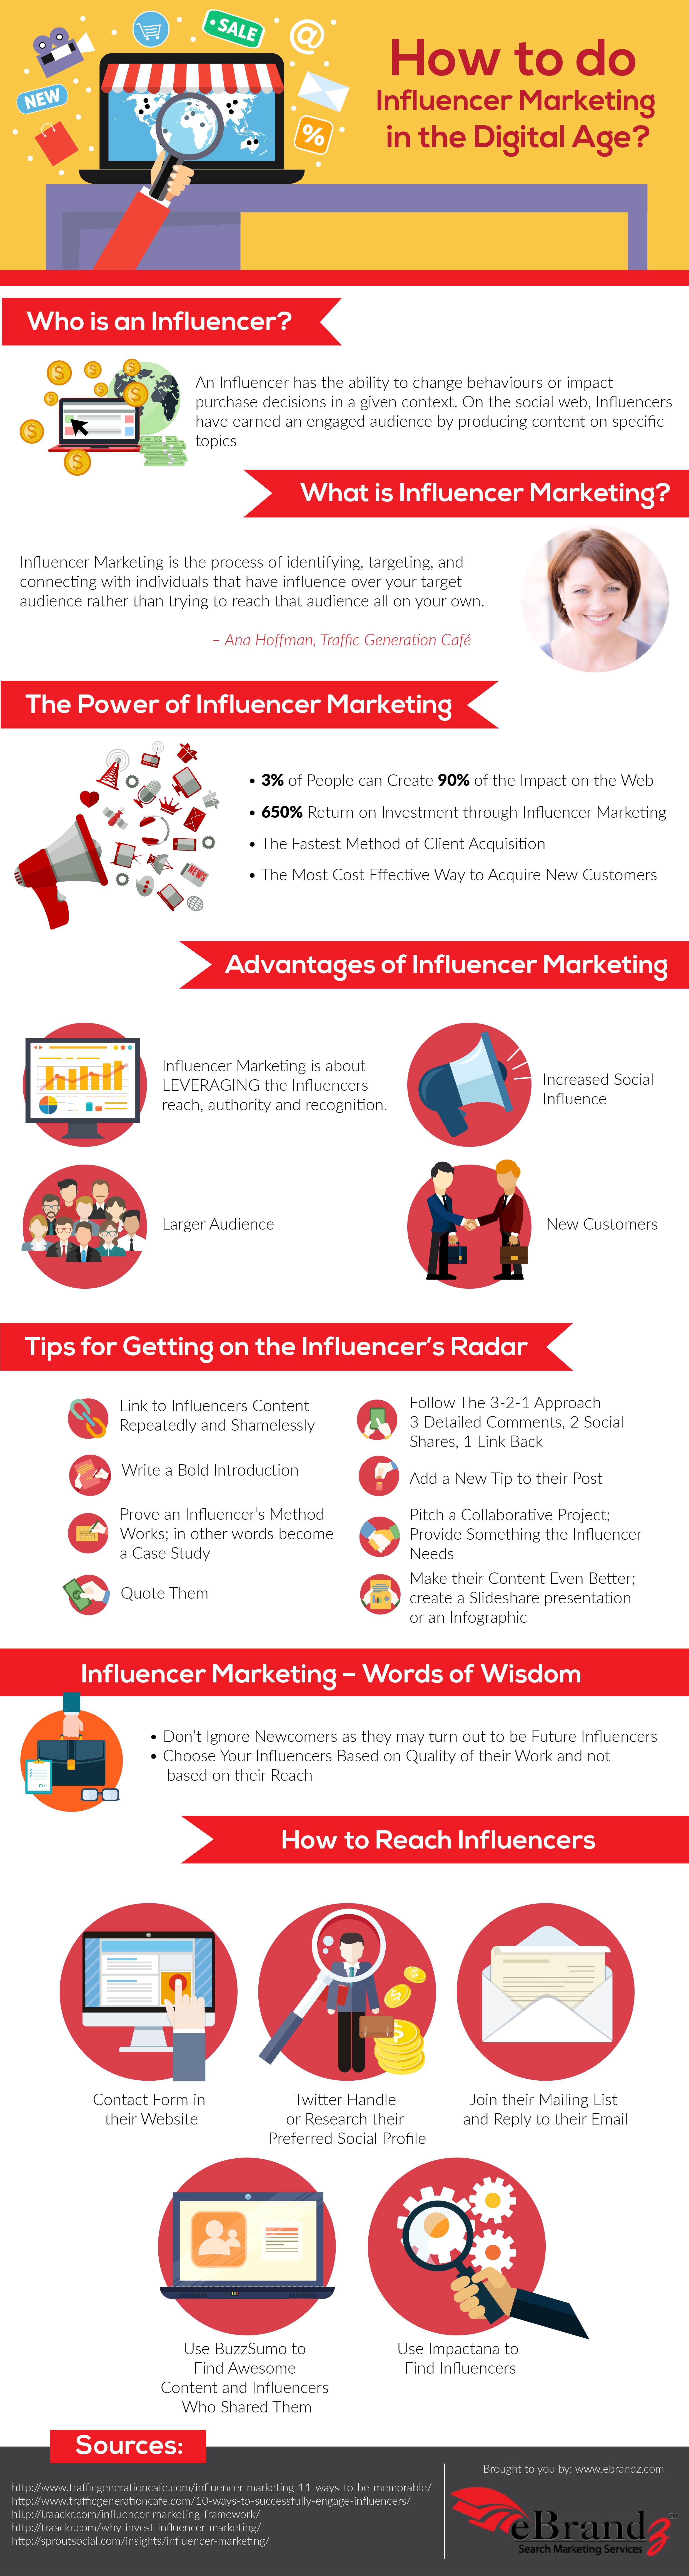 Best Influencer Marketing Tips for Today - How to Get the Best Out of Influencer Marketing Infographic